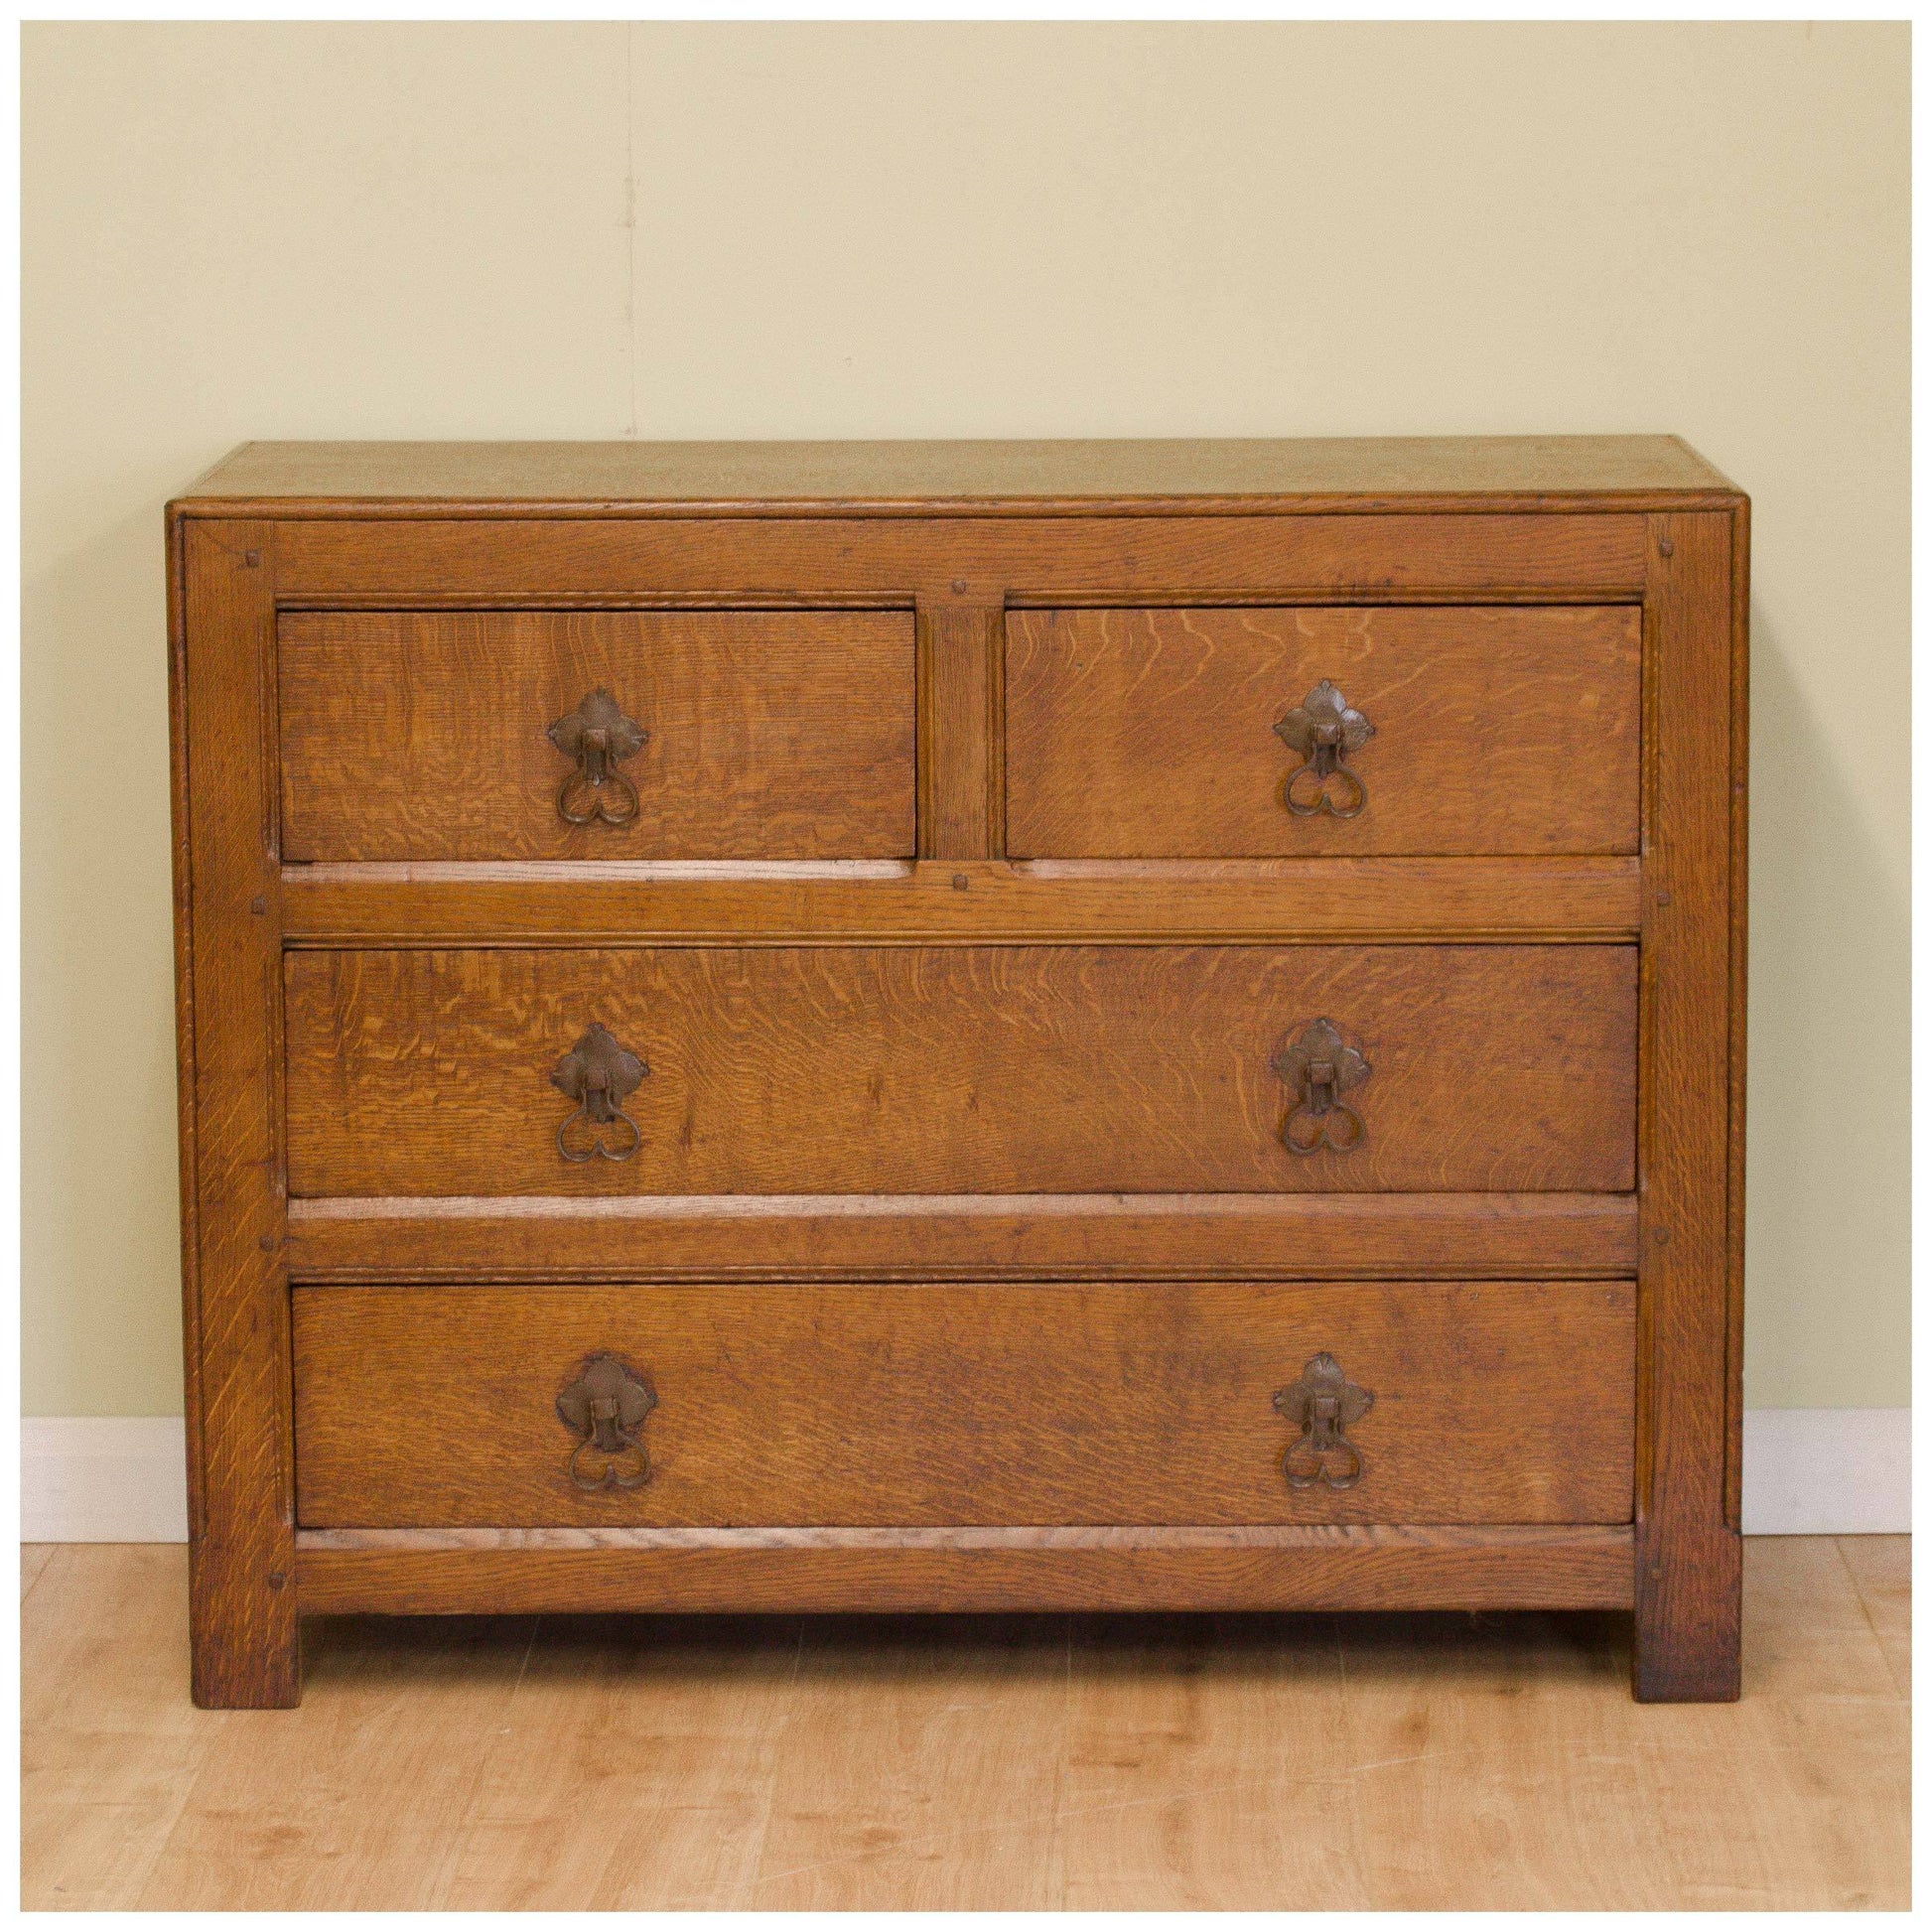 Liberty & Co Arts and Crafts Oak Chest of Drawers 1924